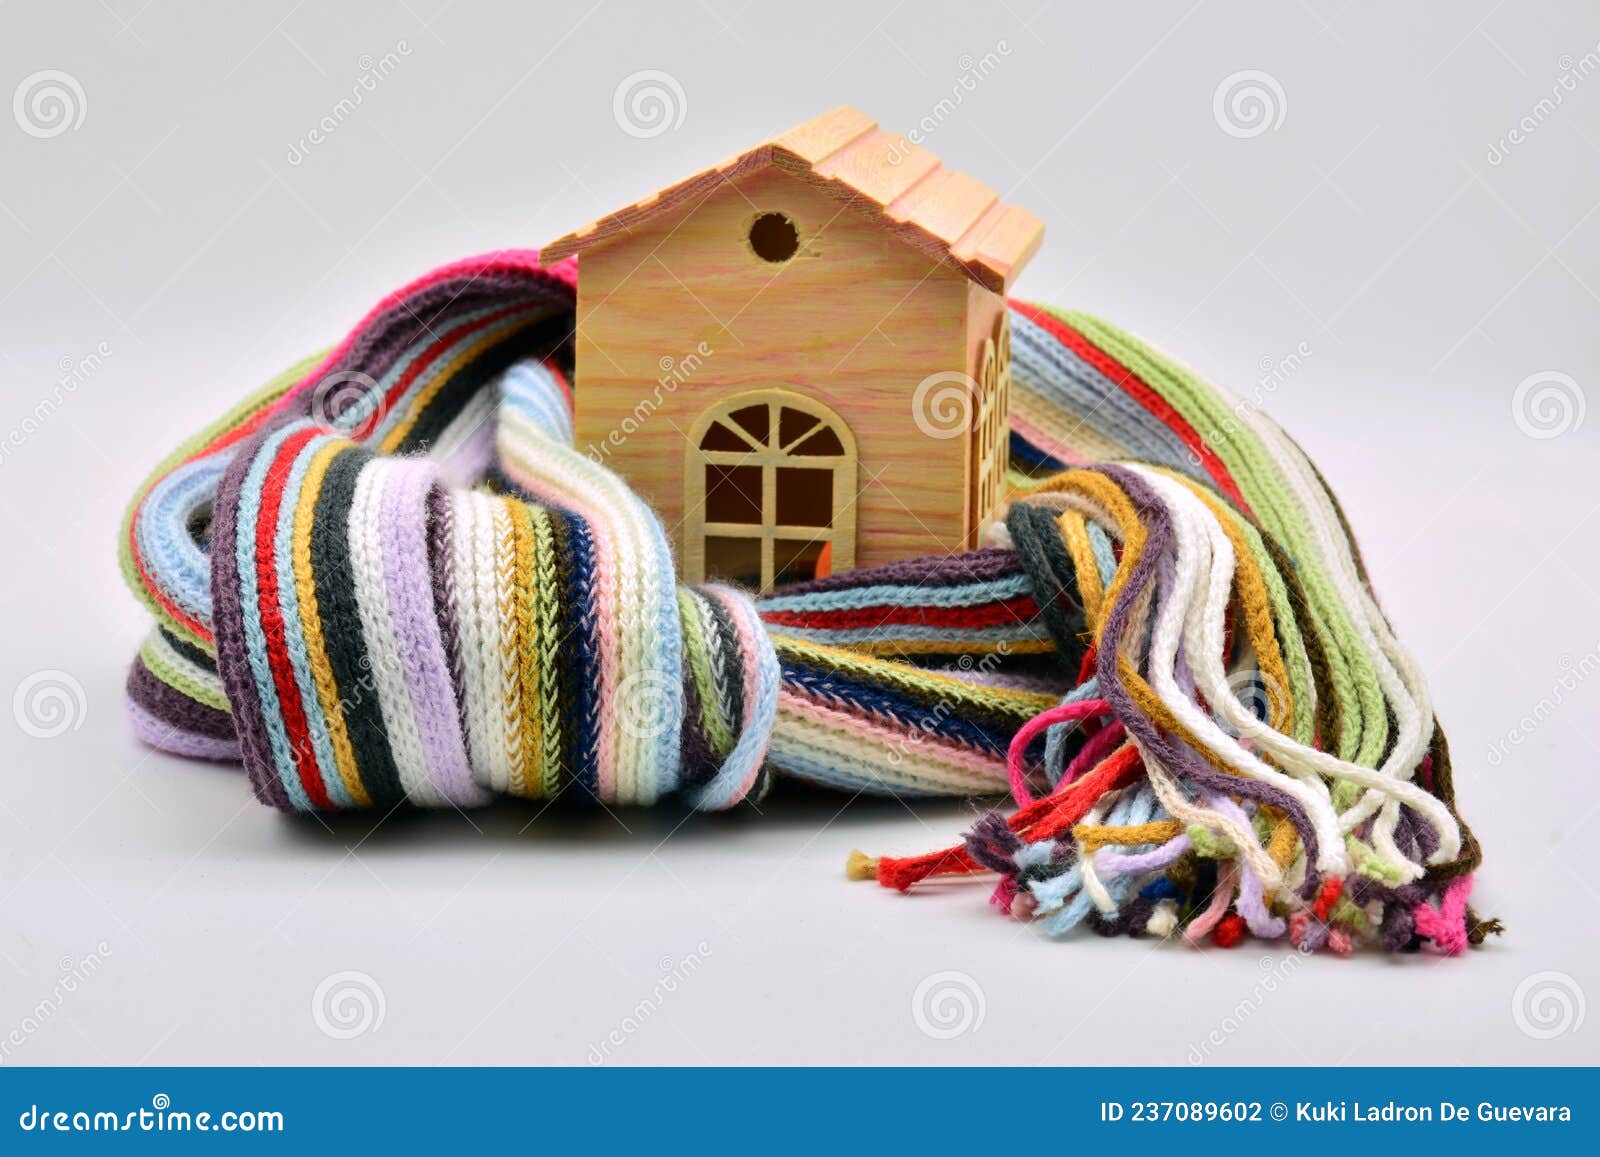 wooden house sheltered with a scarf